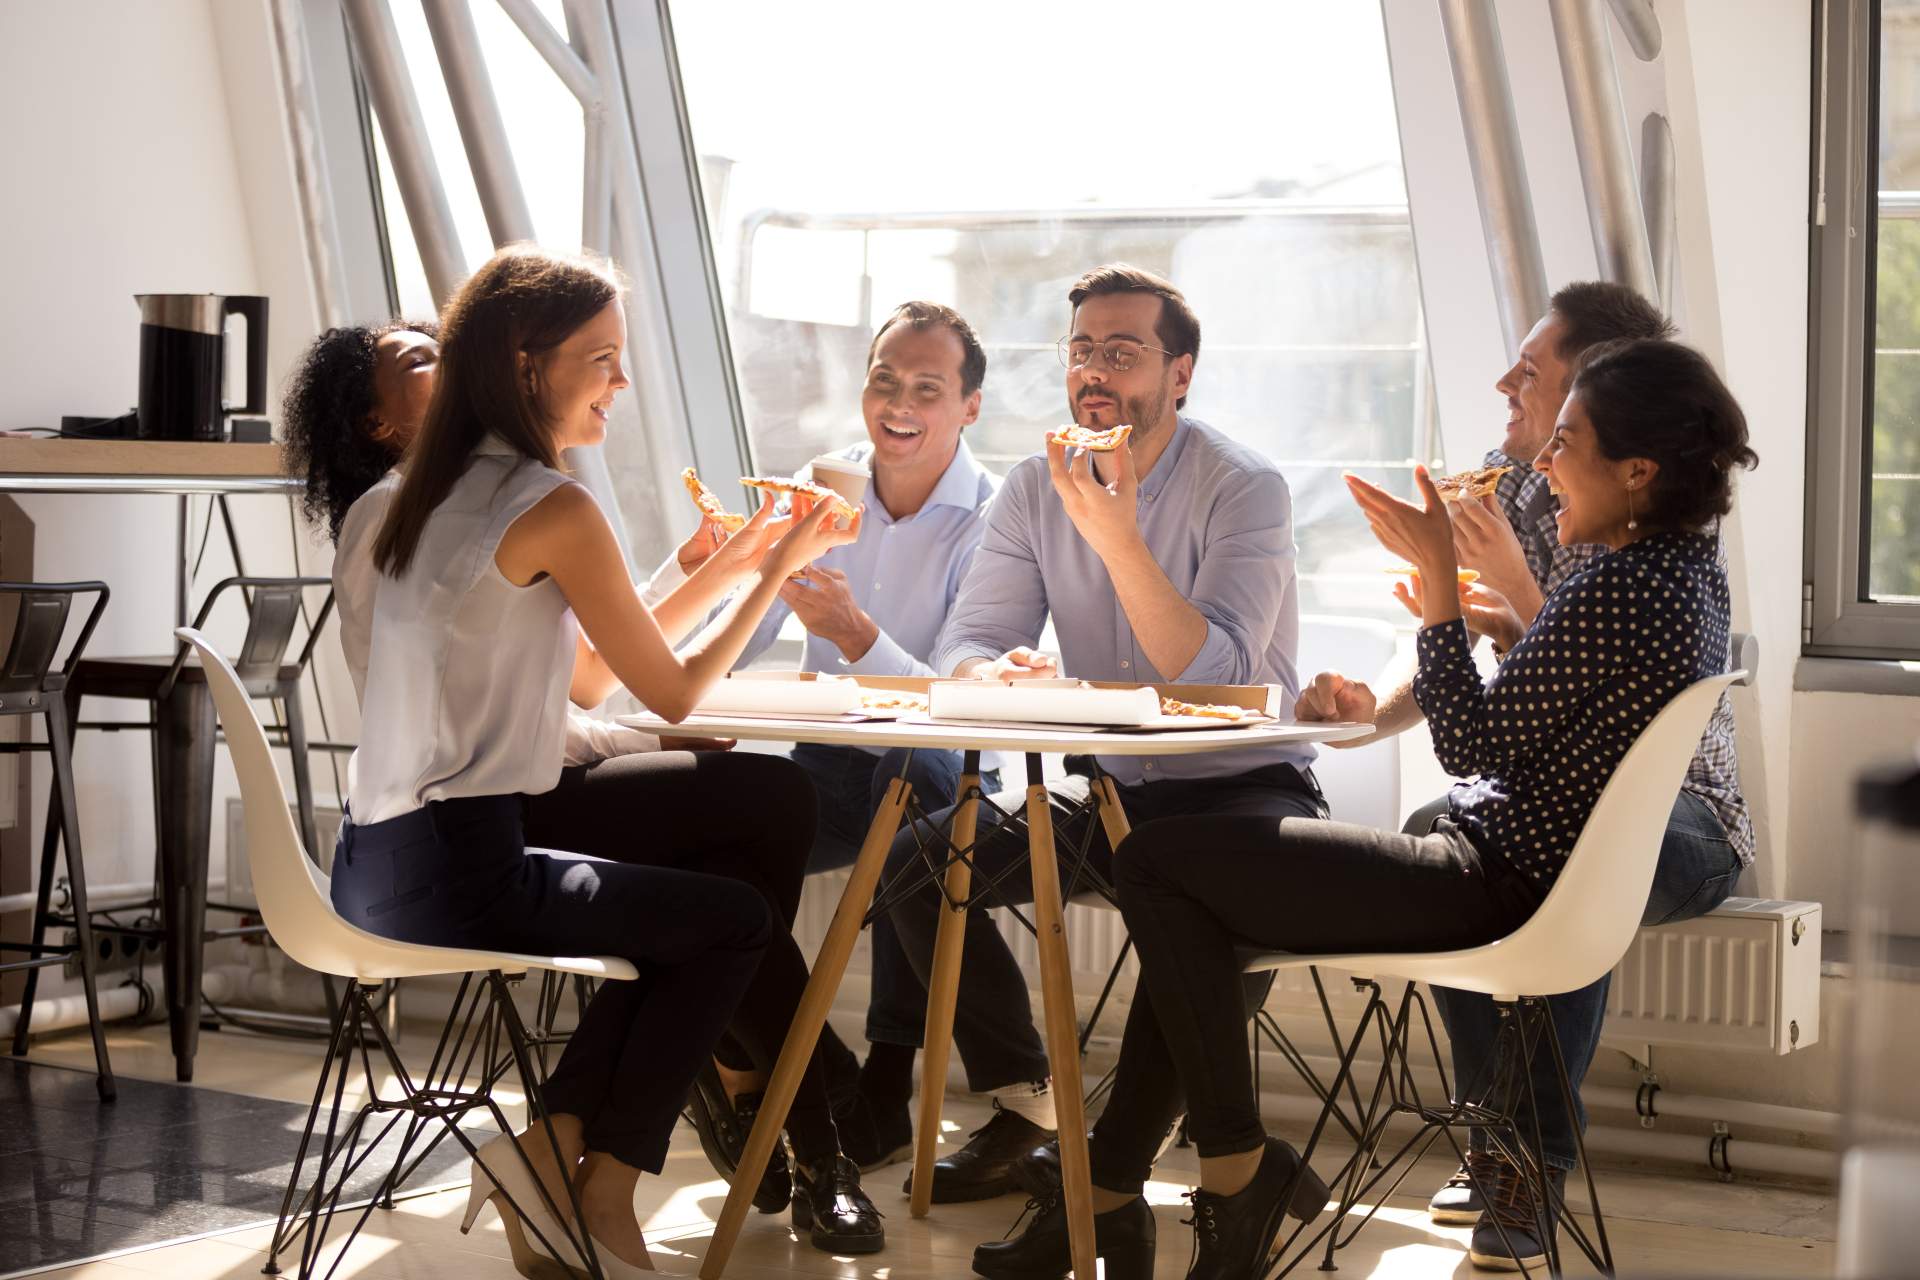 Group of young business people sitting at a table having a discussion